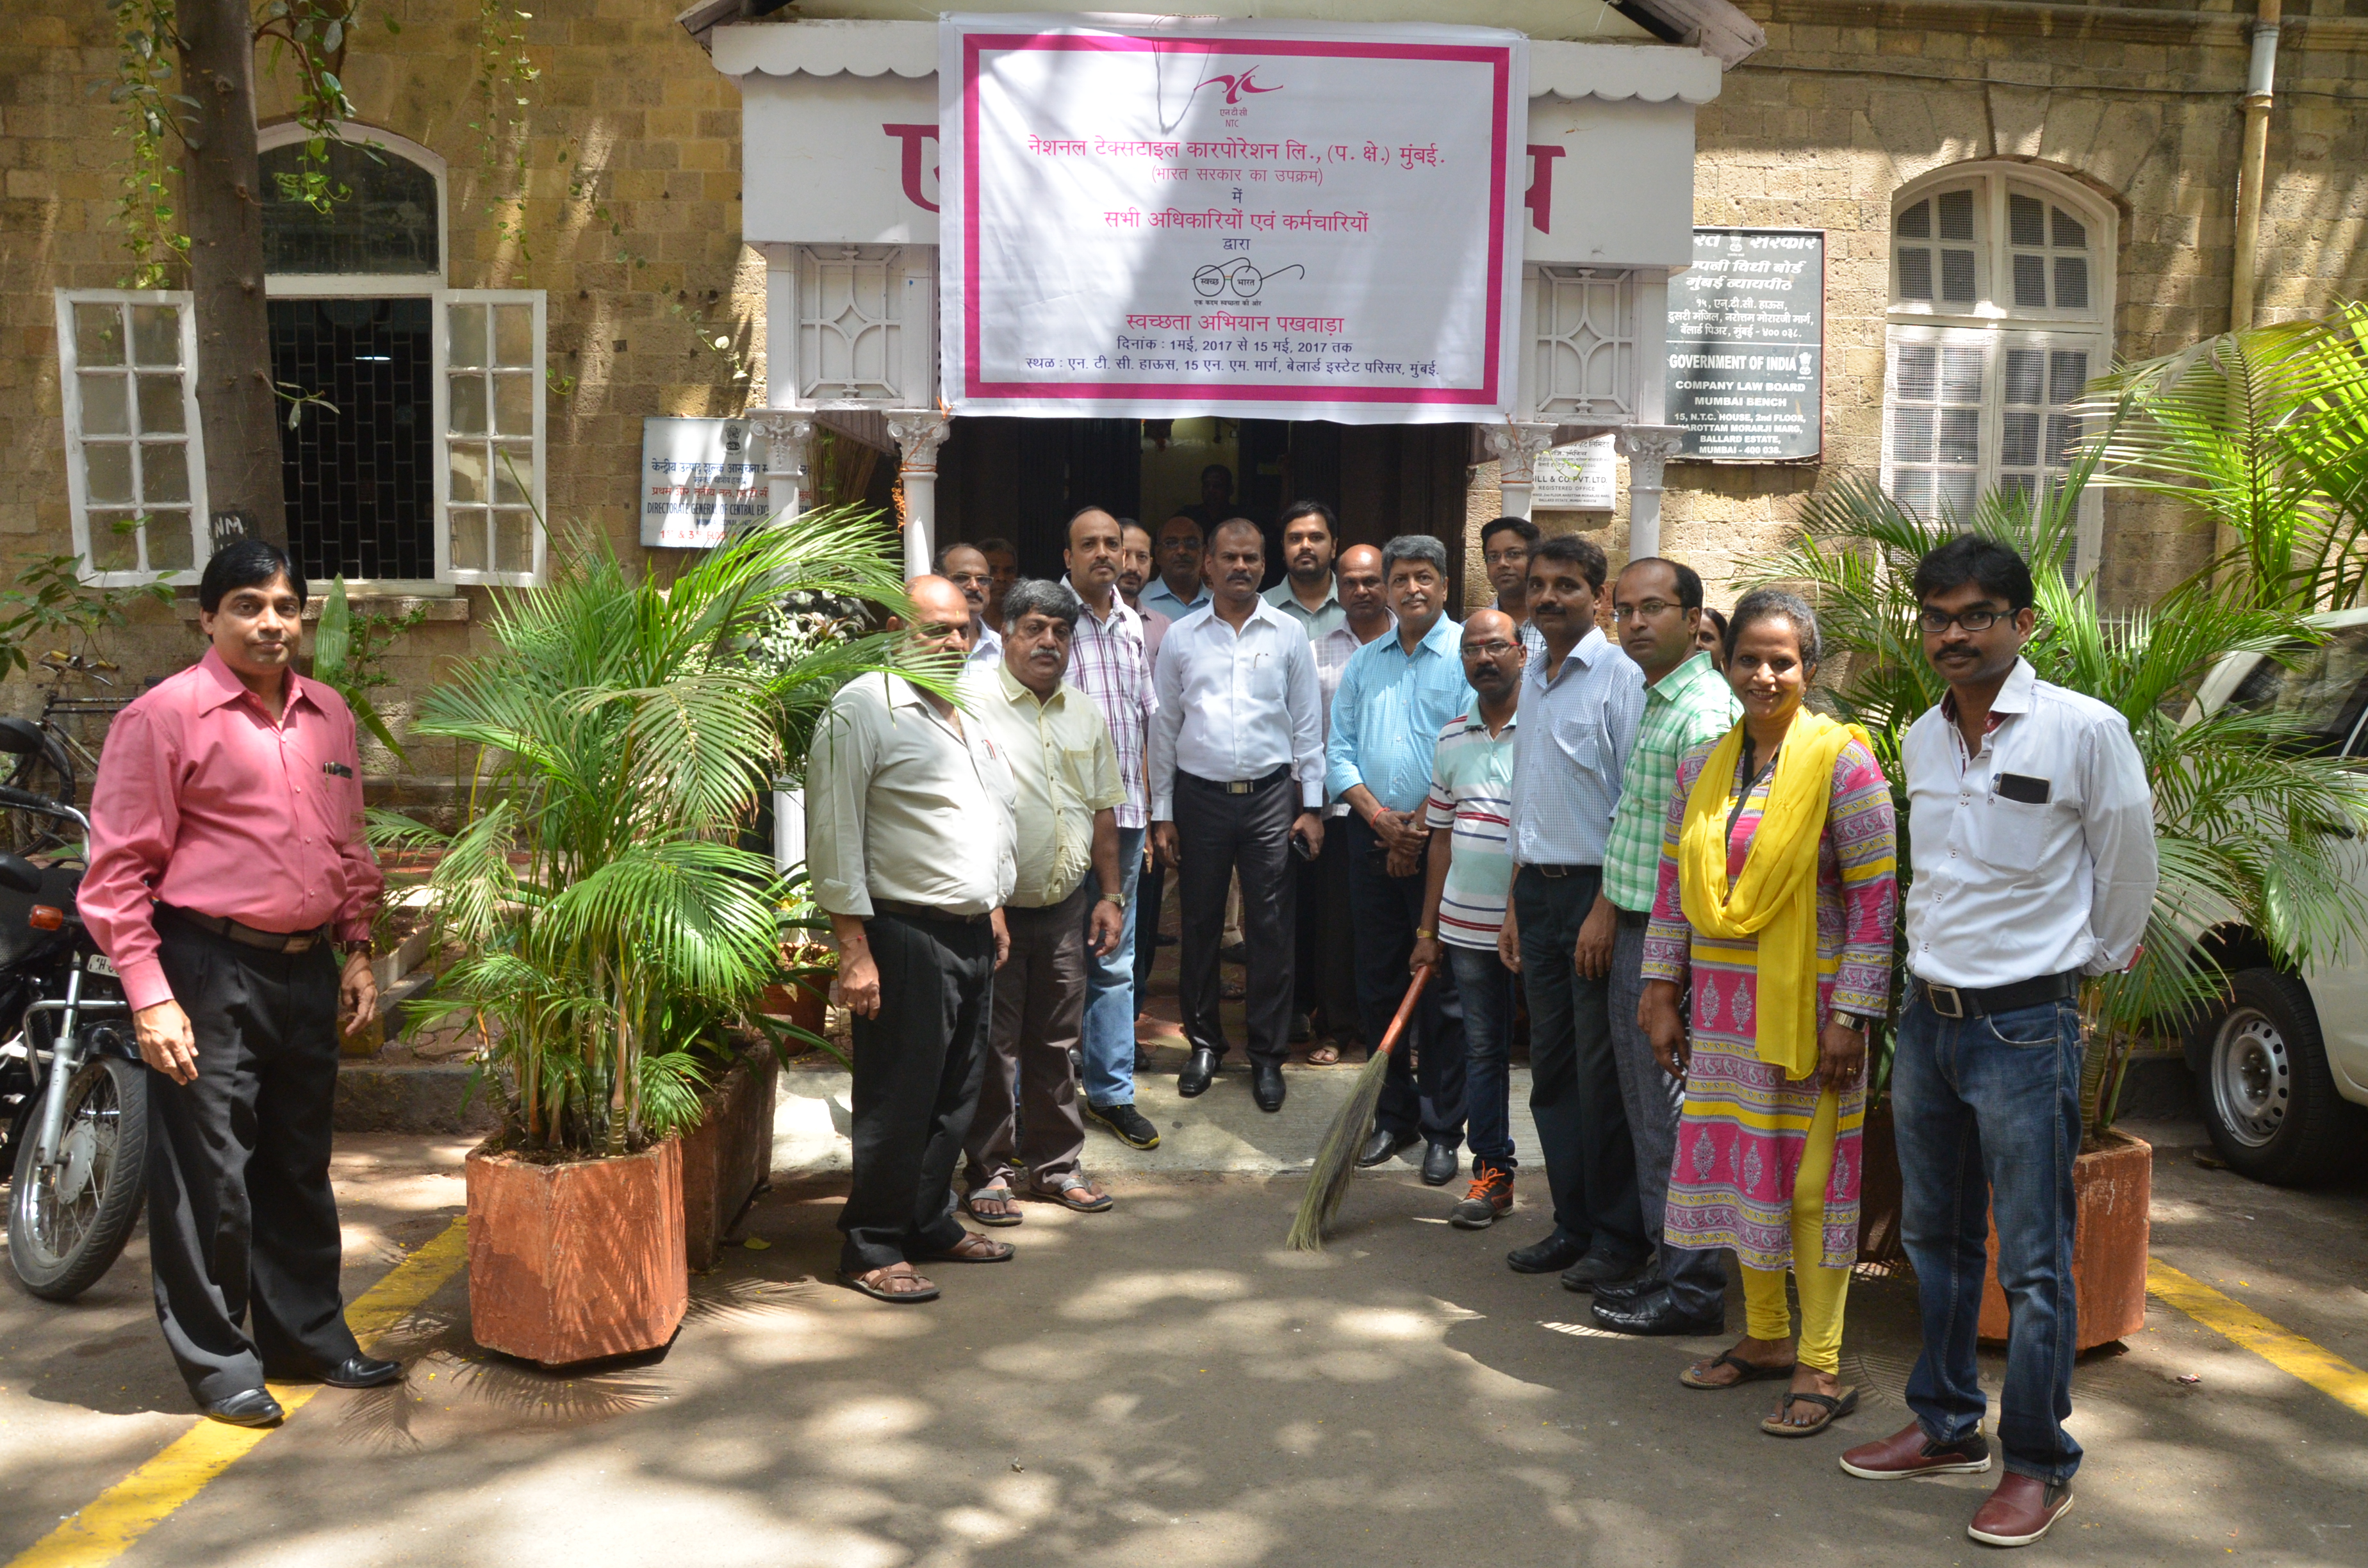 In the supervision of Shri A. Sukumar NTC, WRO officials took actively participating in the Swachh Bharat Pakhwada 2017